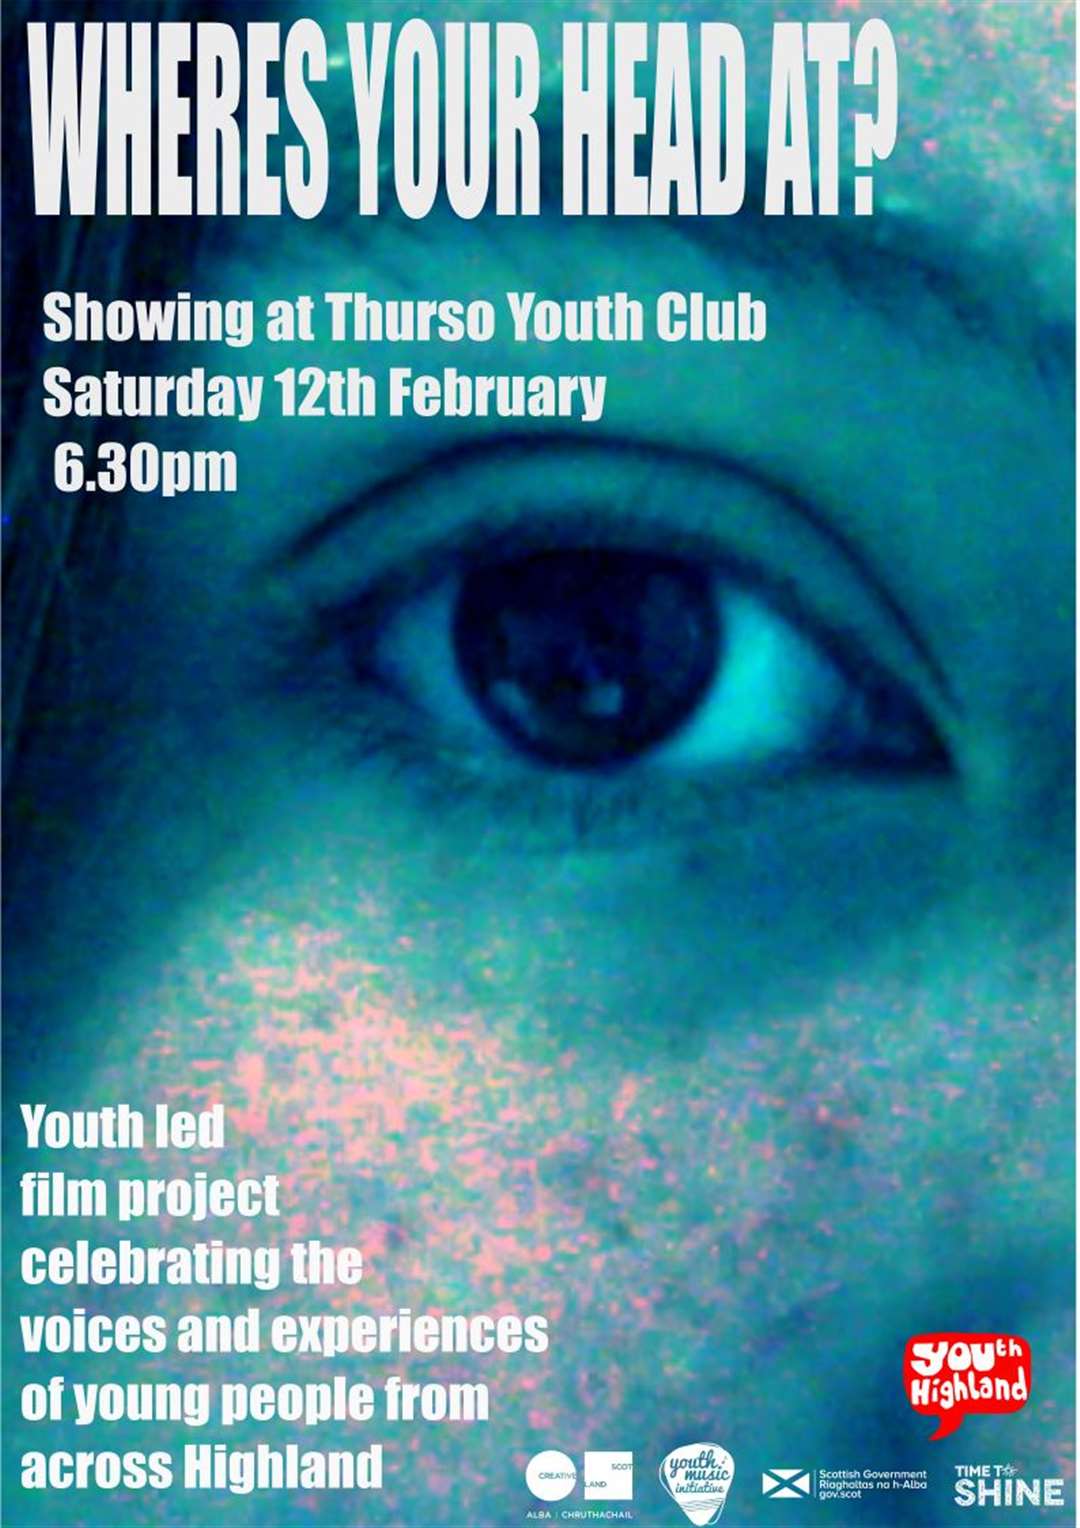 Poster design for the film and sound project being presented in Thurso.